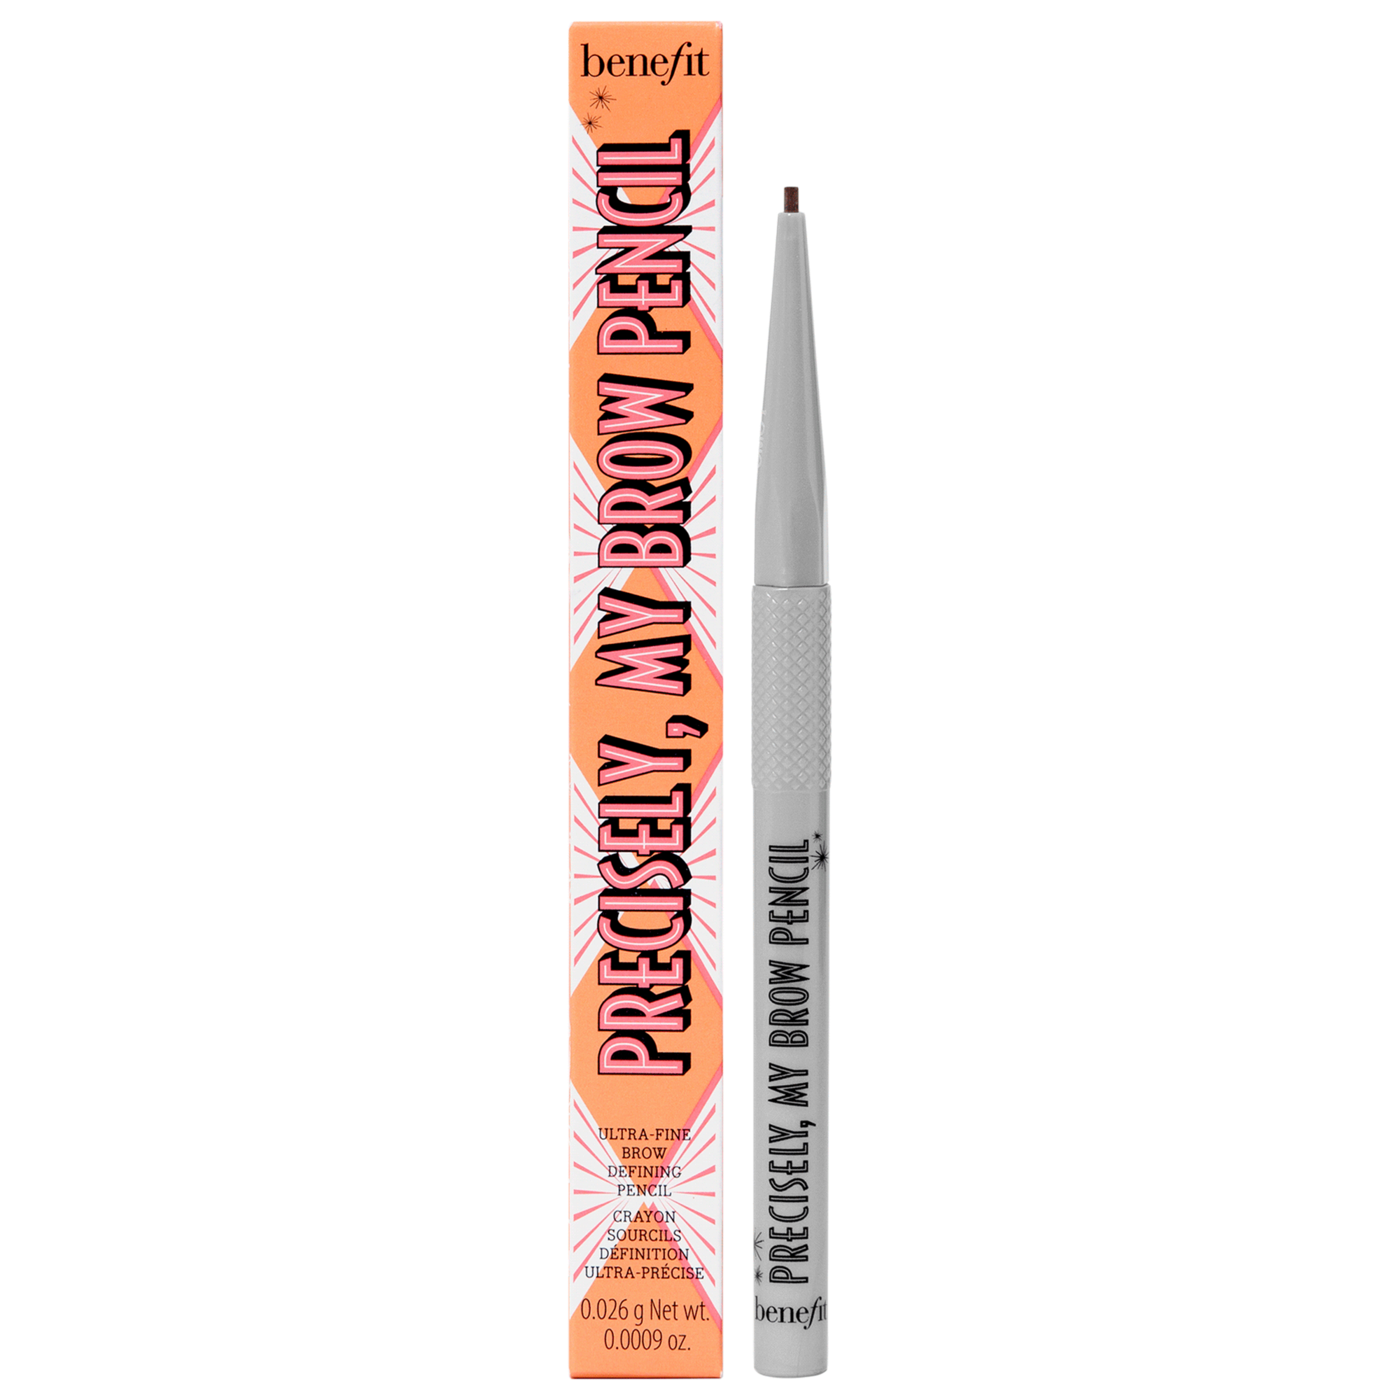 Precisely, My Brow Eyebrow Pencil in shade 05